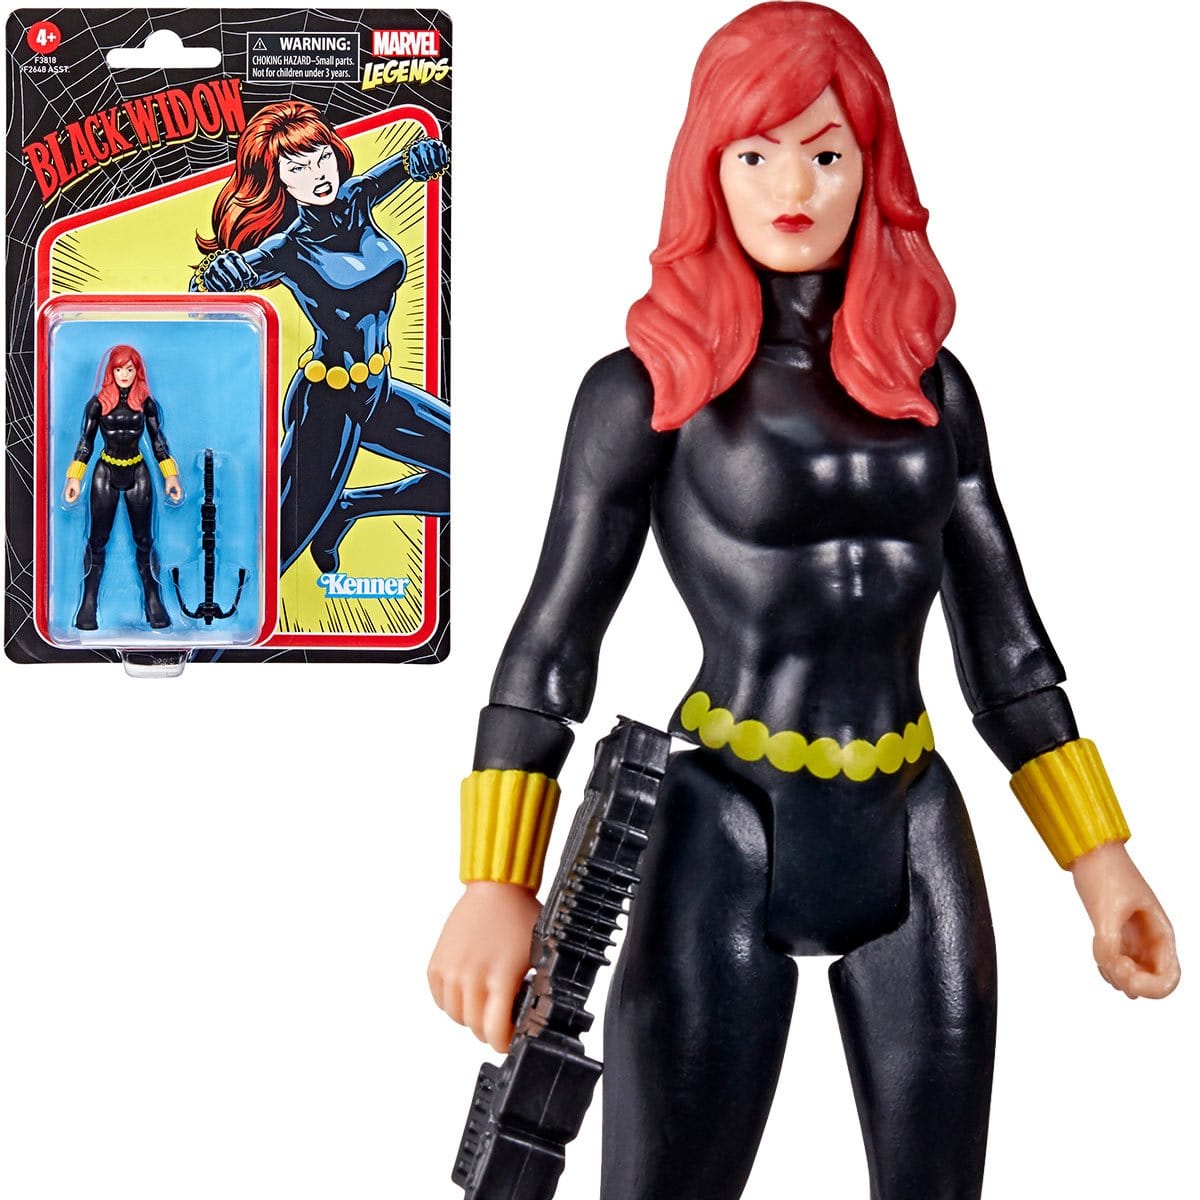 Marvel Legends Retro 375 Collection Black Widow 3 3/4-Inch Action Figure Front of box